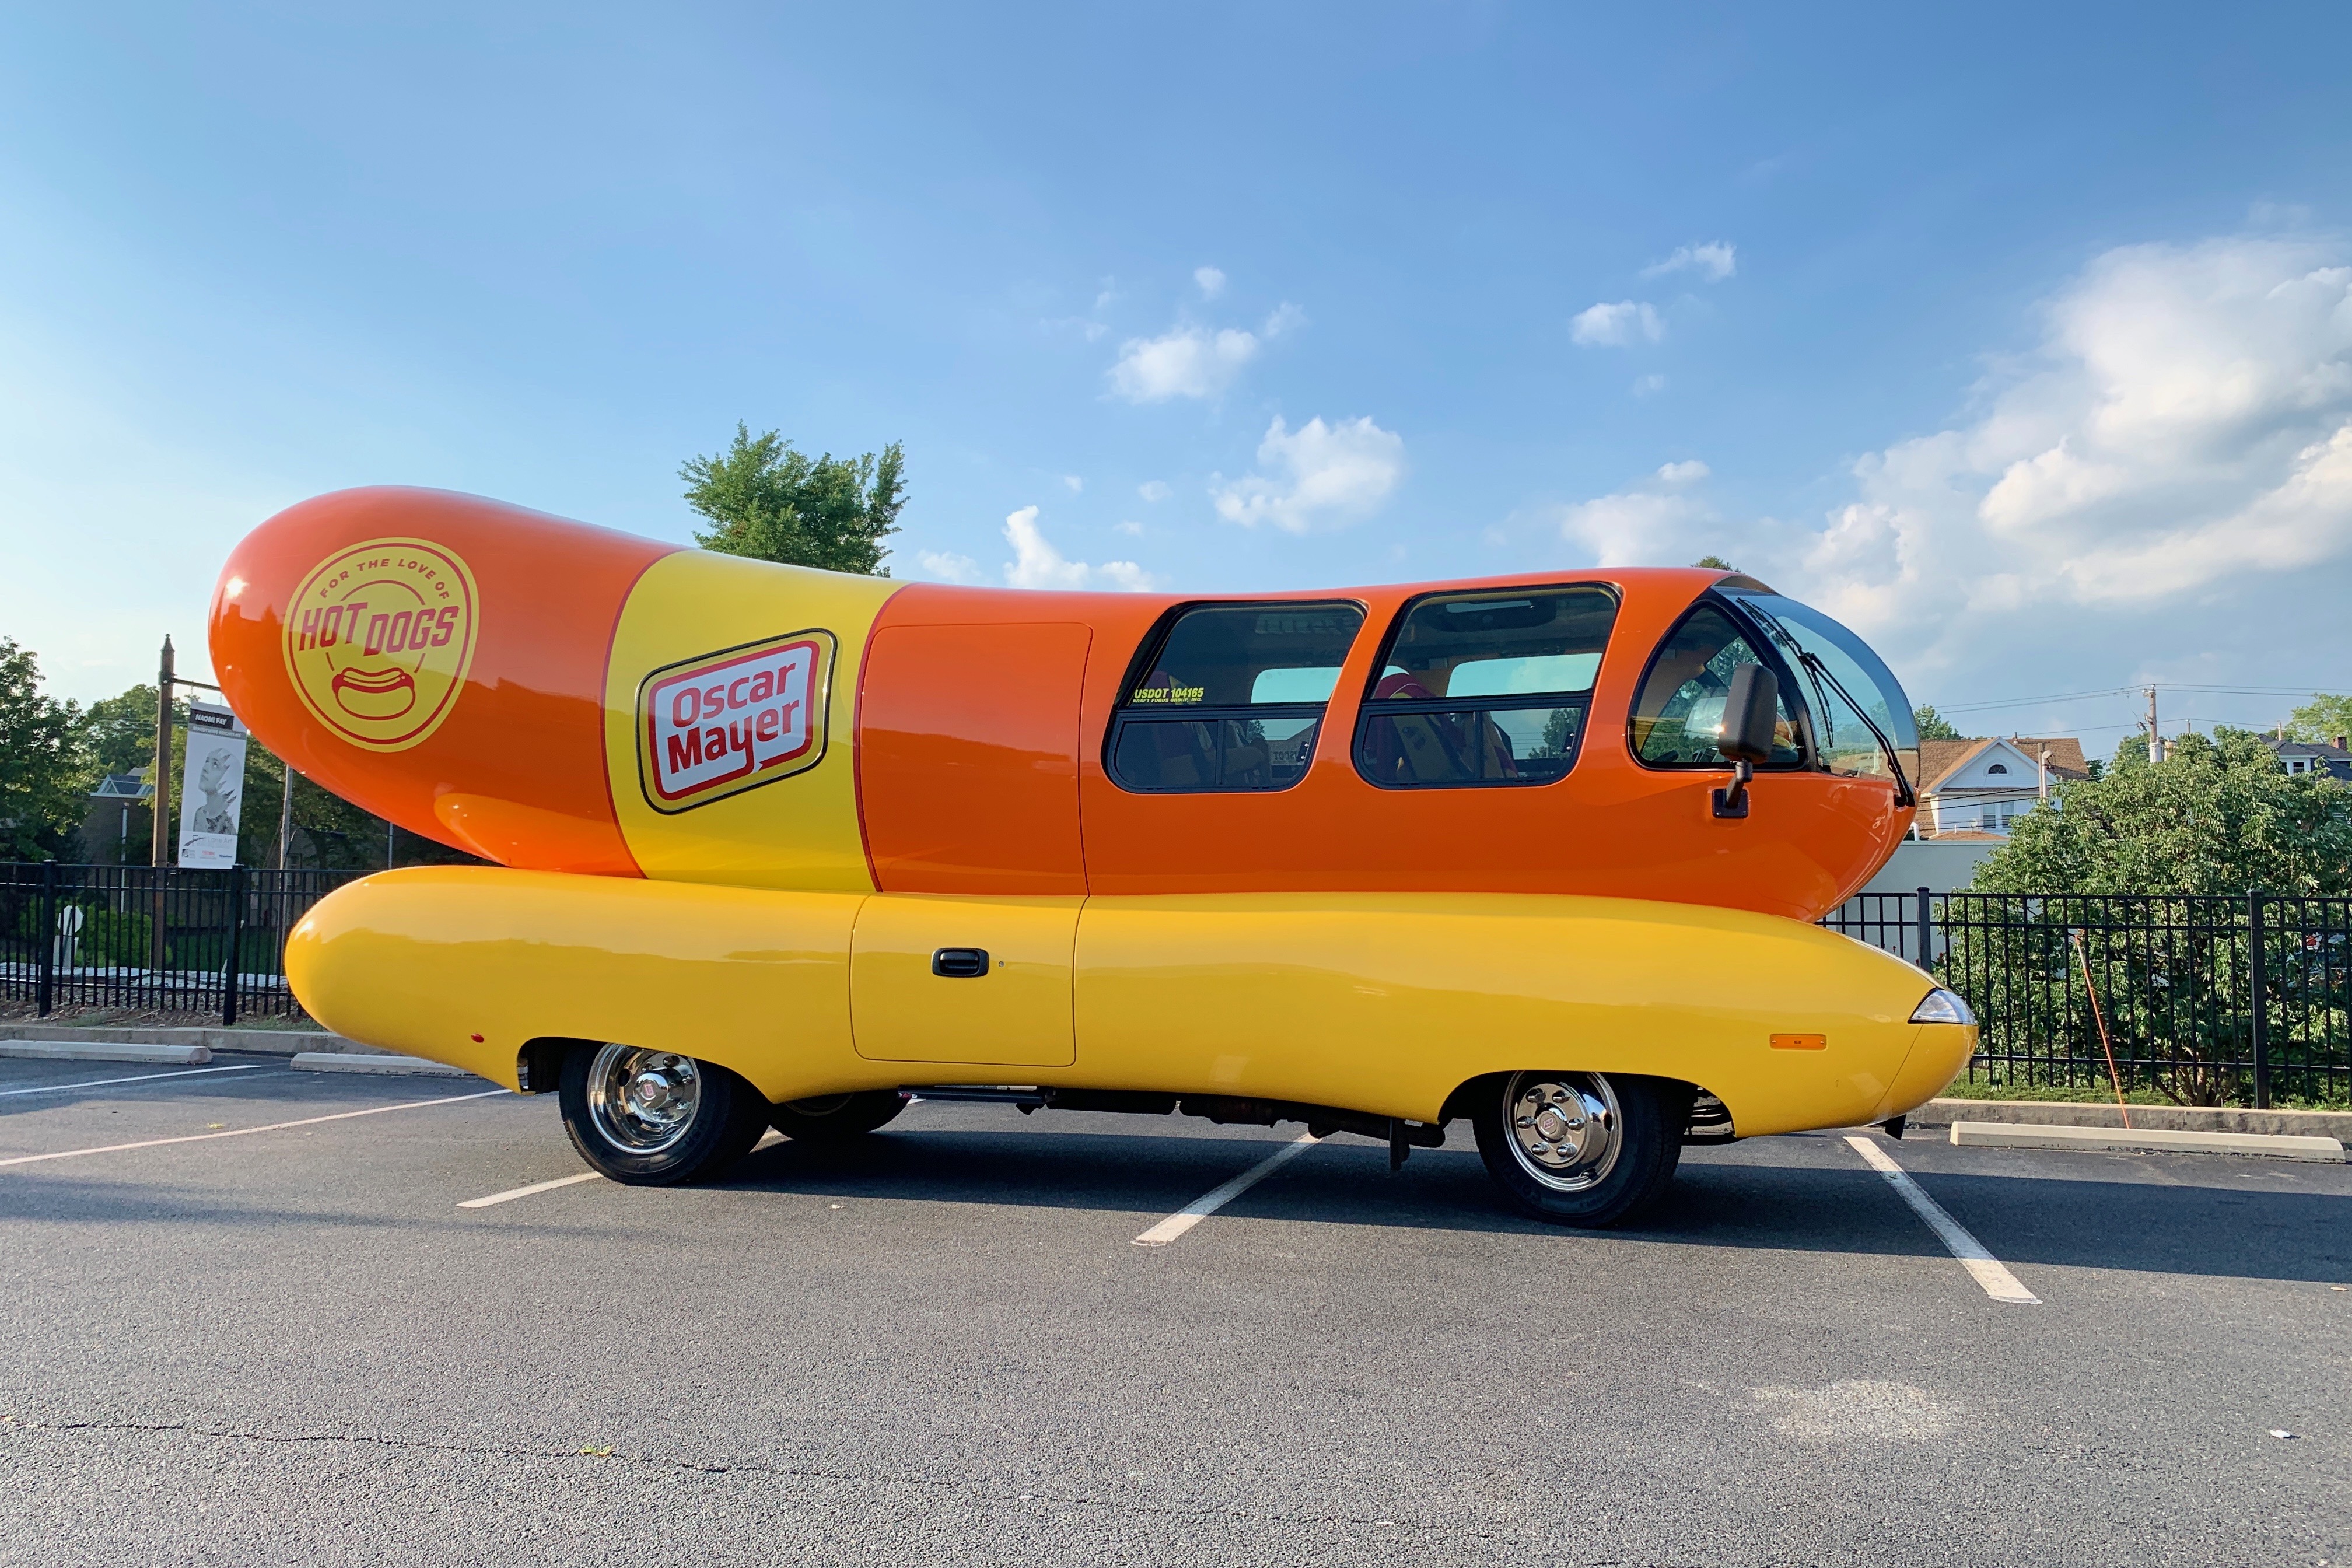 The Oscar Mayer Wienermobile is Coming to Berks Count | Y102 | Andi